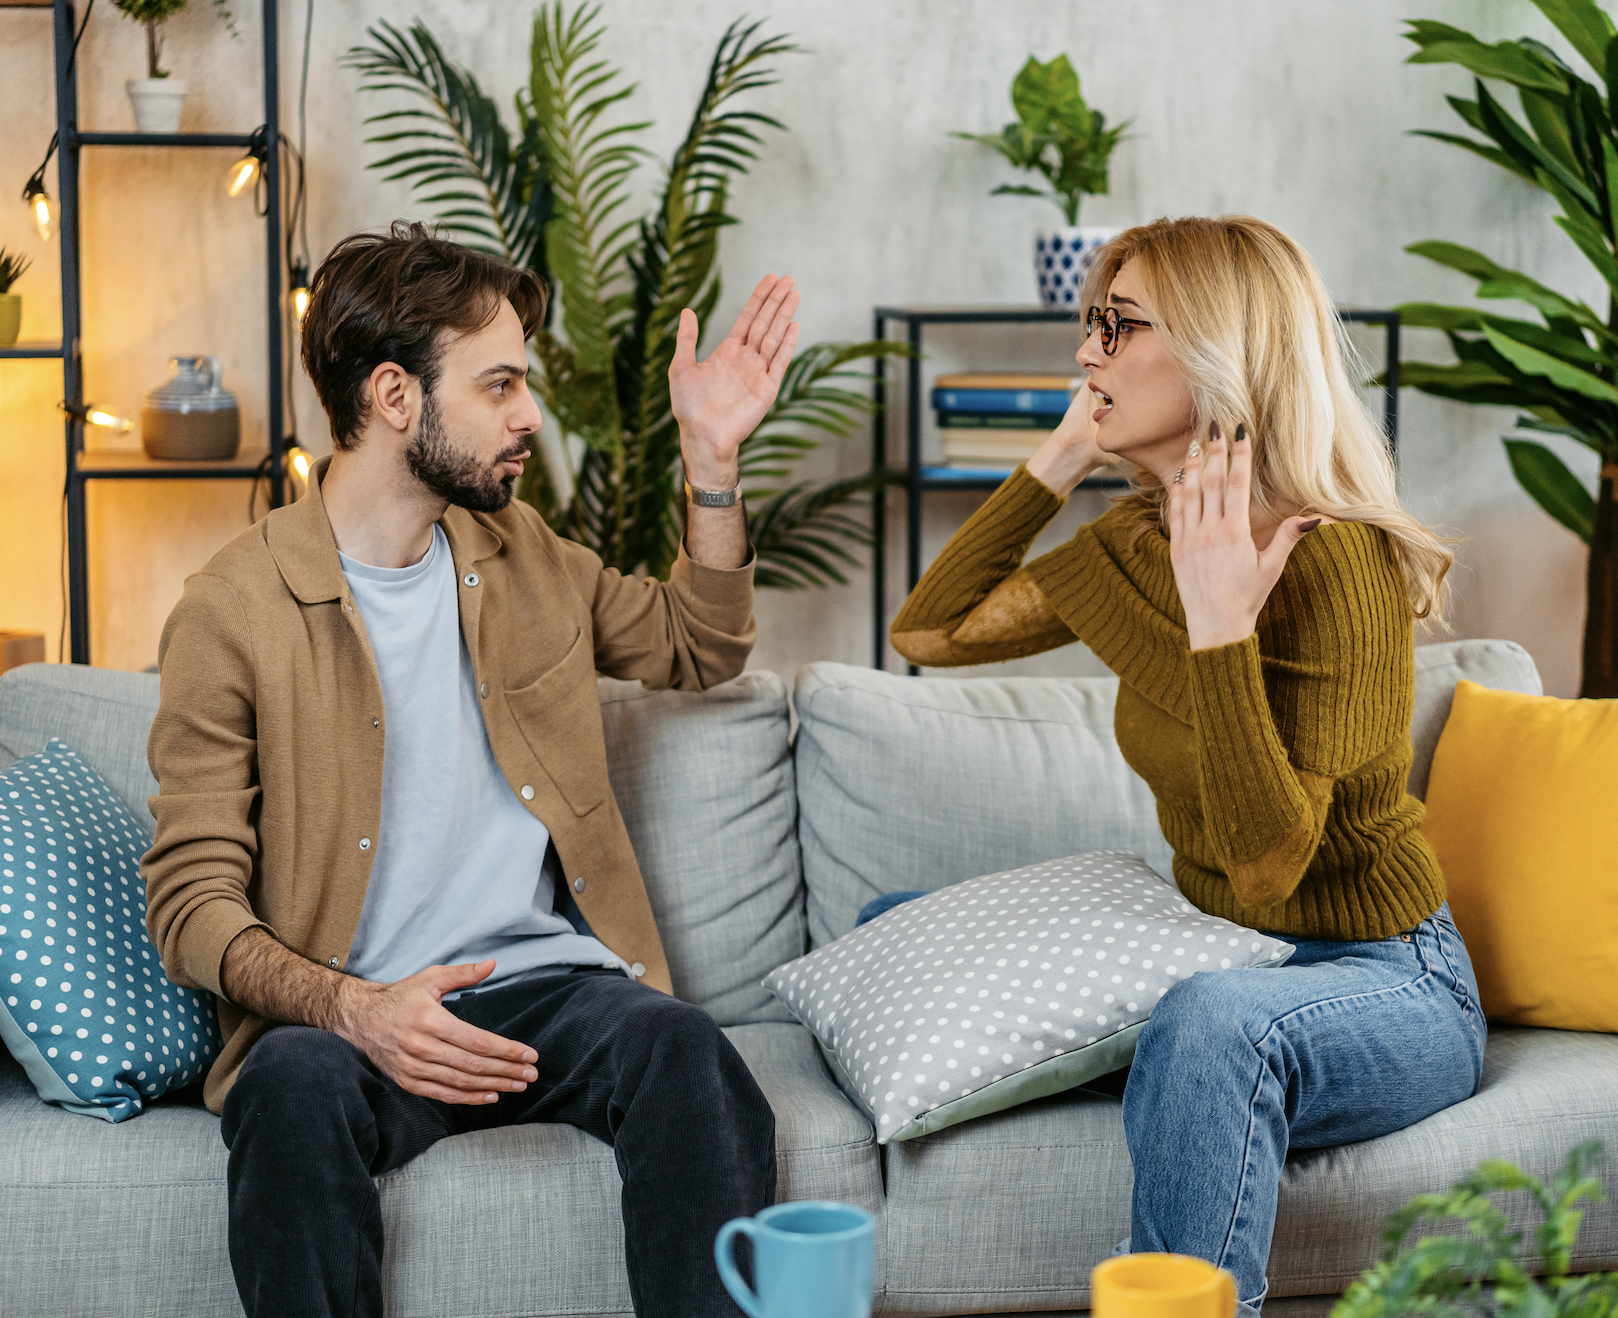 Two people having a conversation on a sofa with expressive hand gestures